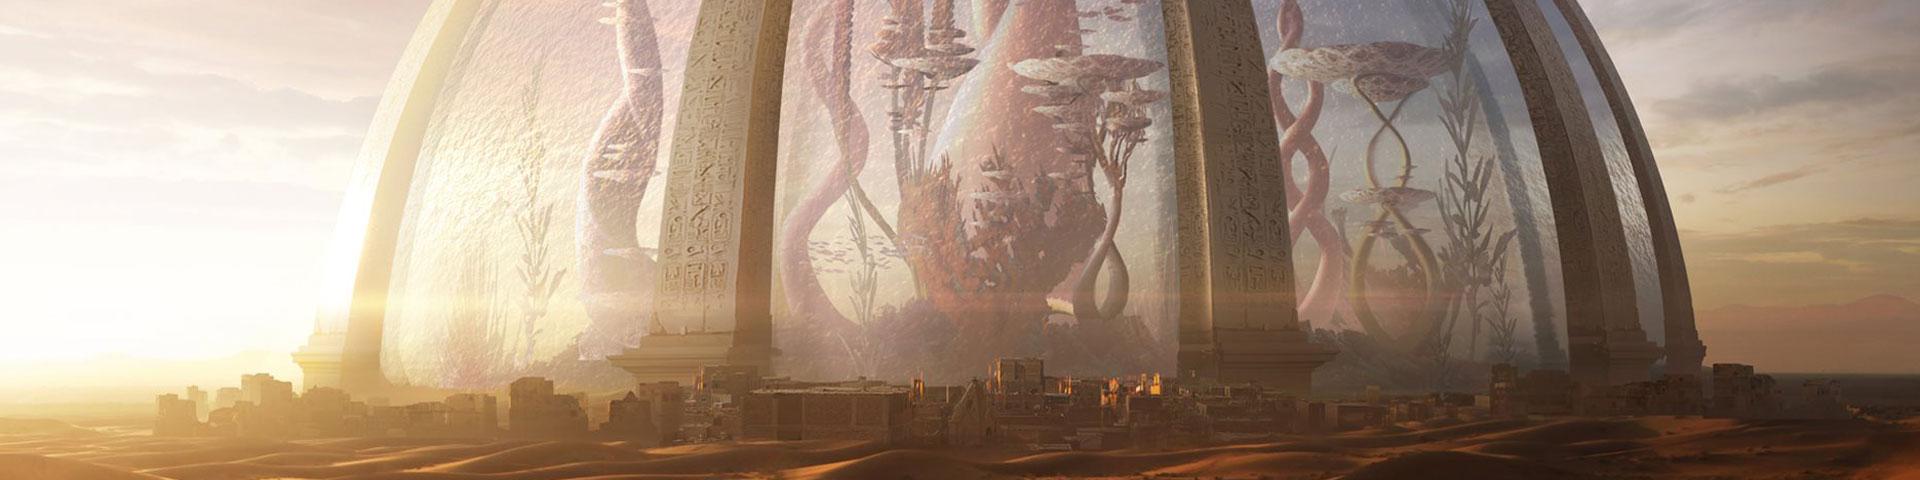 A sealed dome with strange alien structures inside it towers over a nearby town.